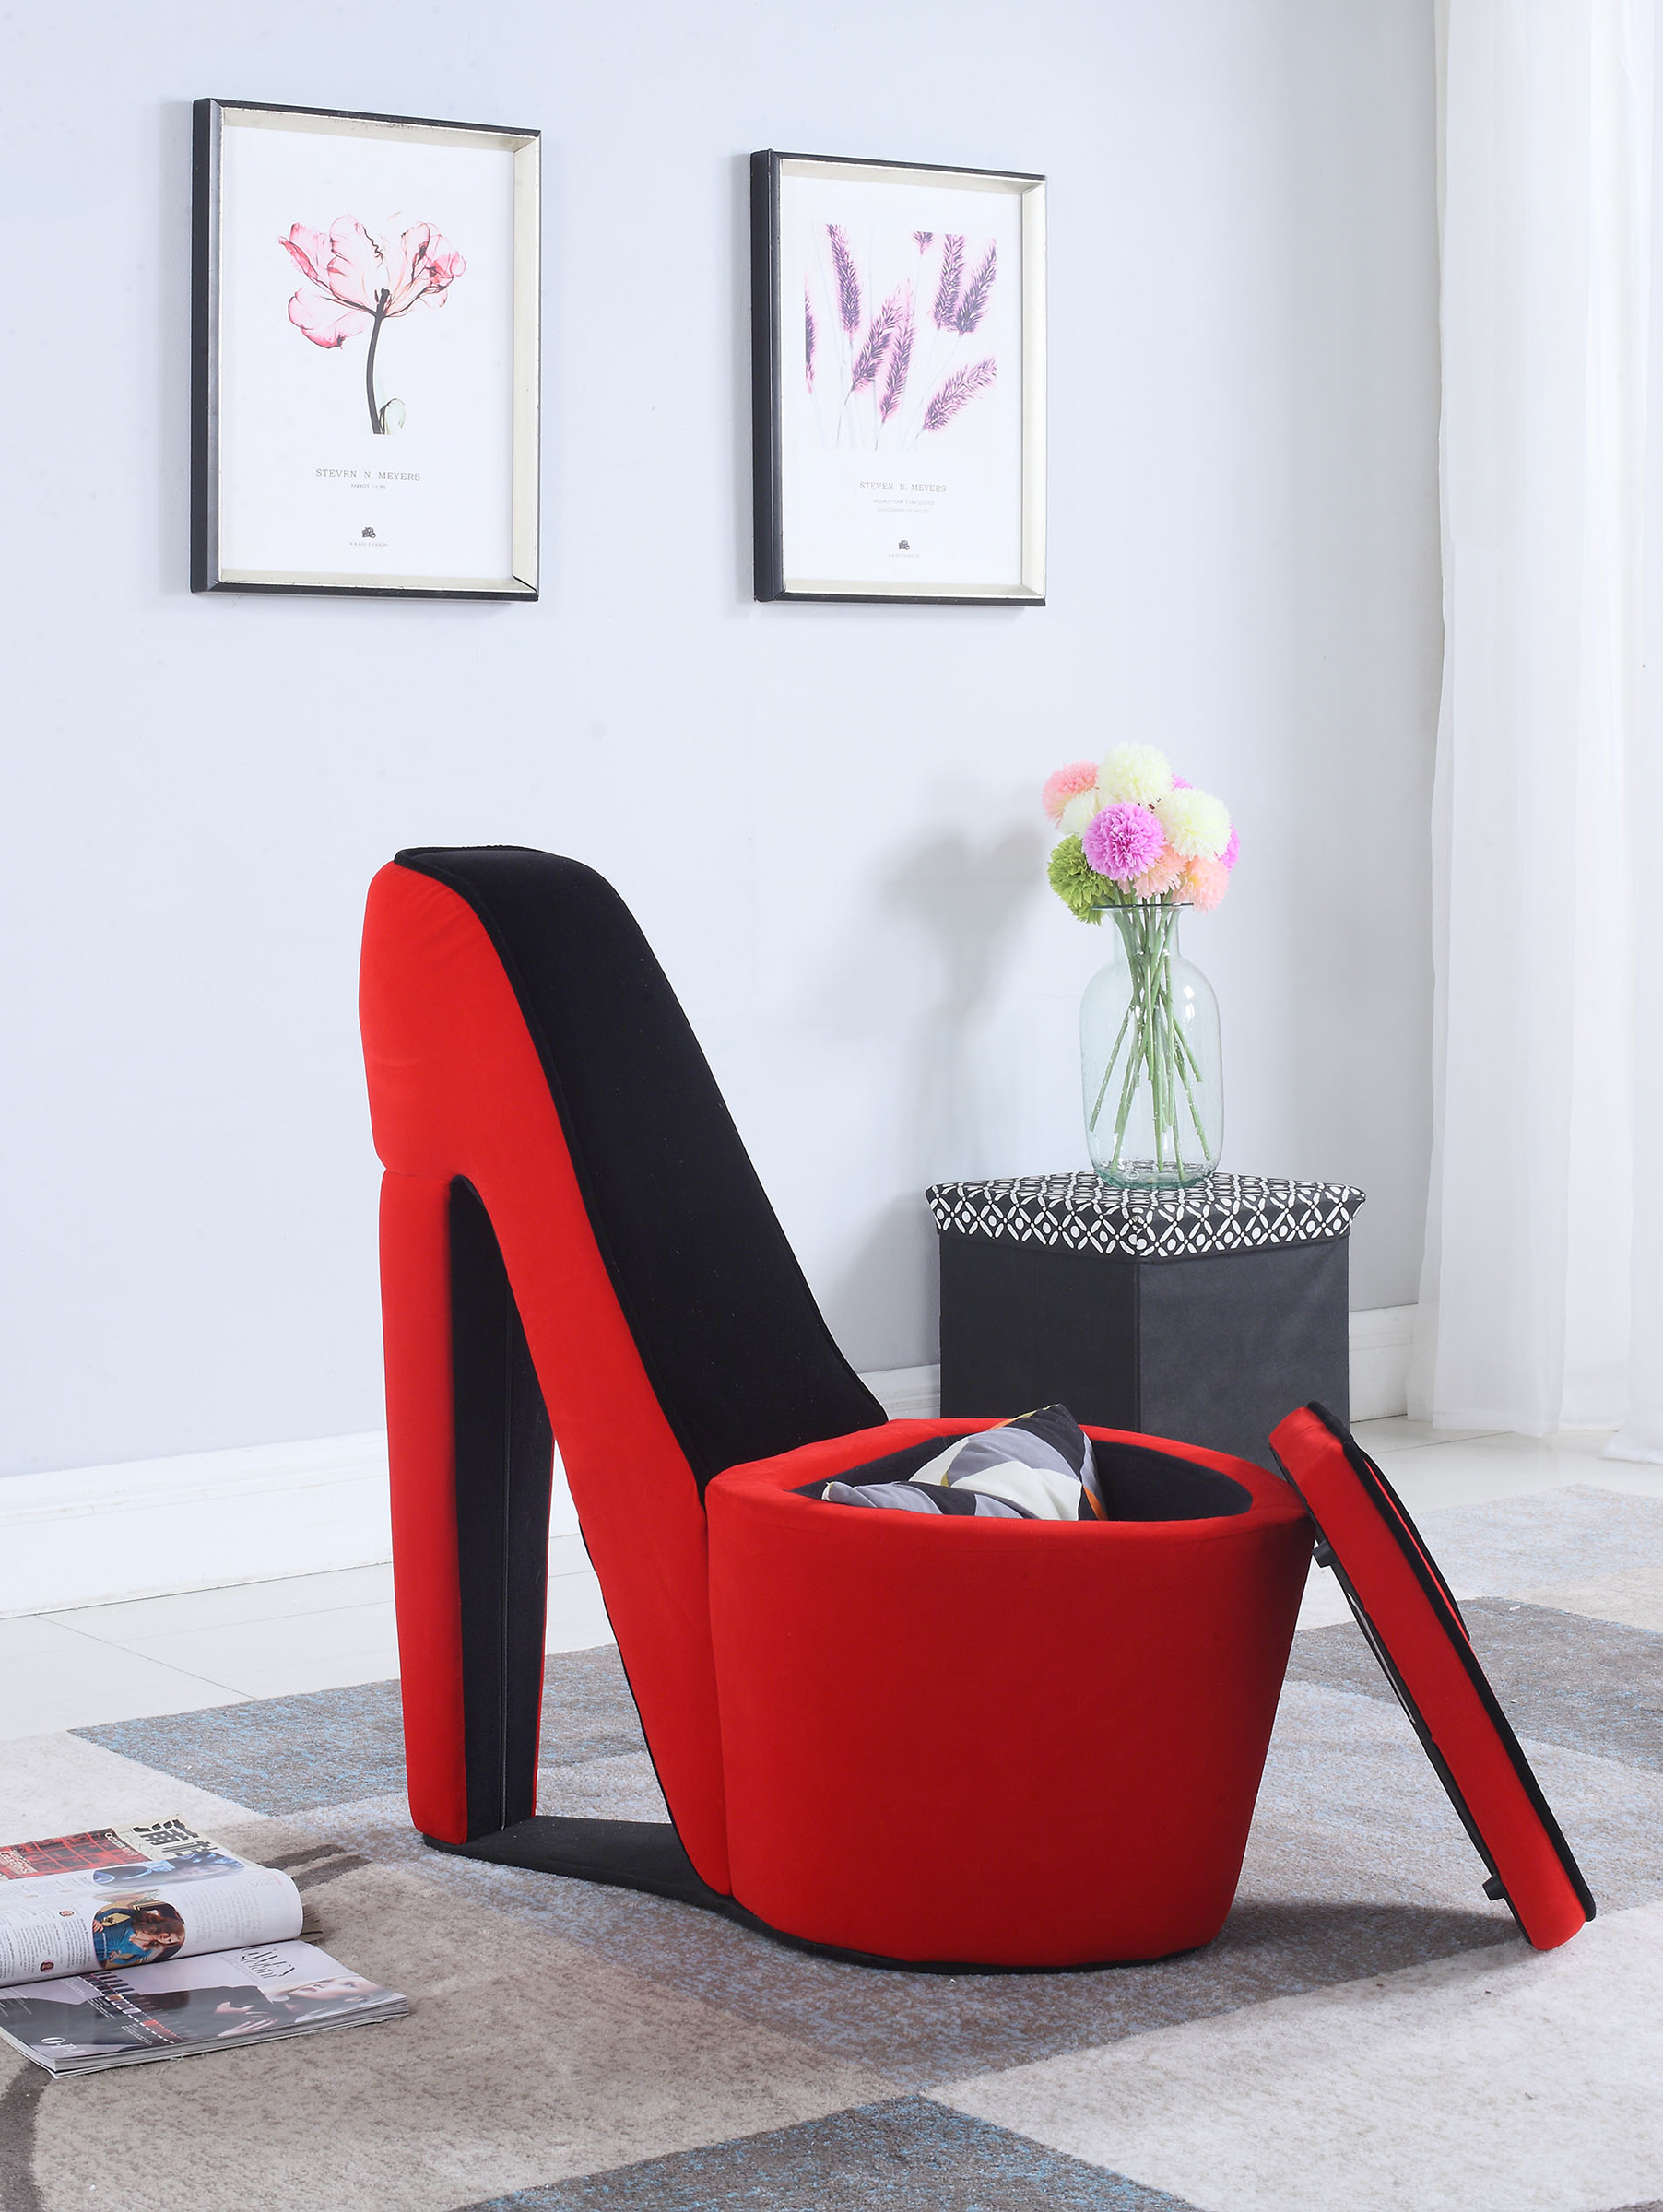 High Heel Shoe Chairs will create a modern and elegant impression in any  room. Click here to find … | High heel shoe chair, Shoe chair, Oversized  chair and ottoman